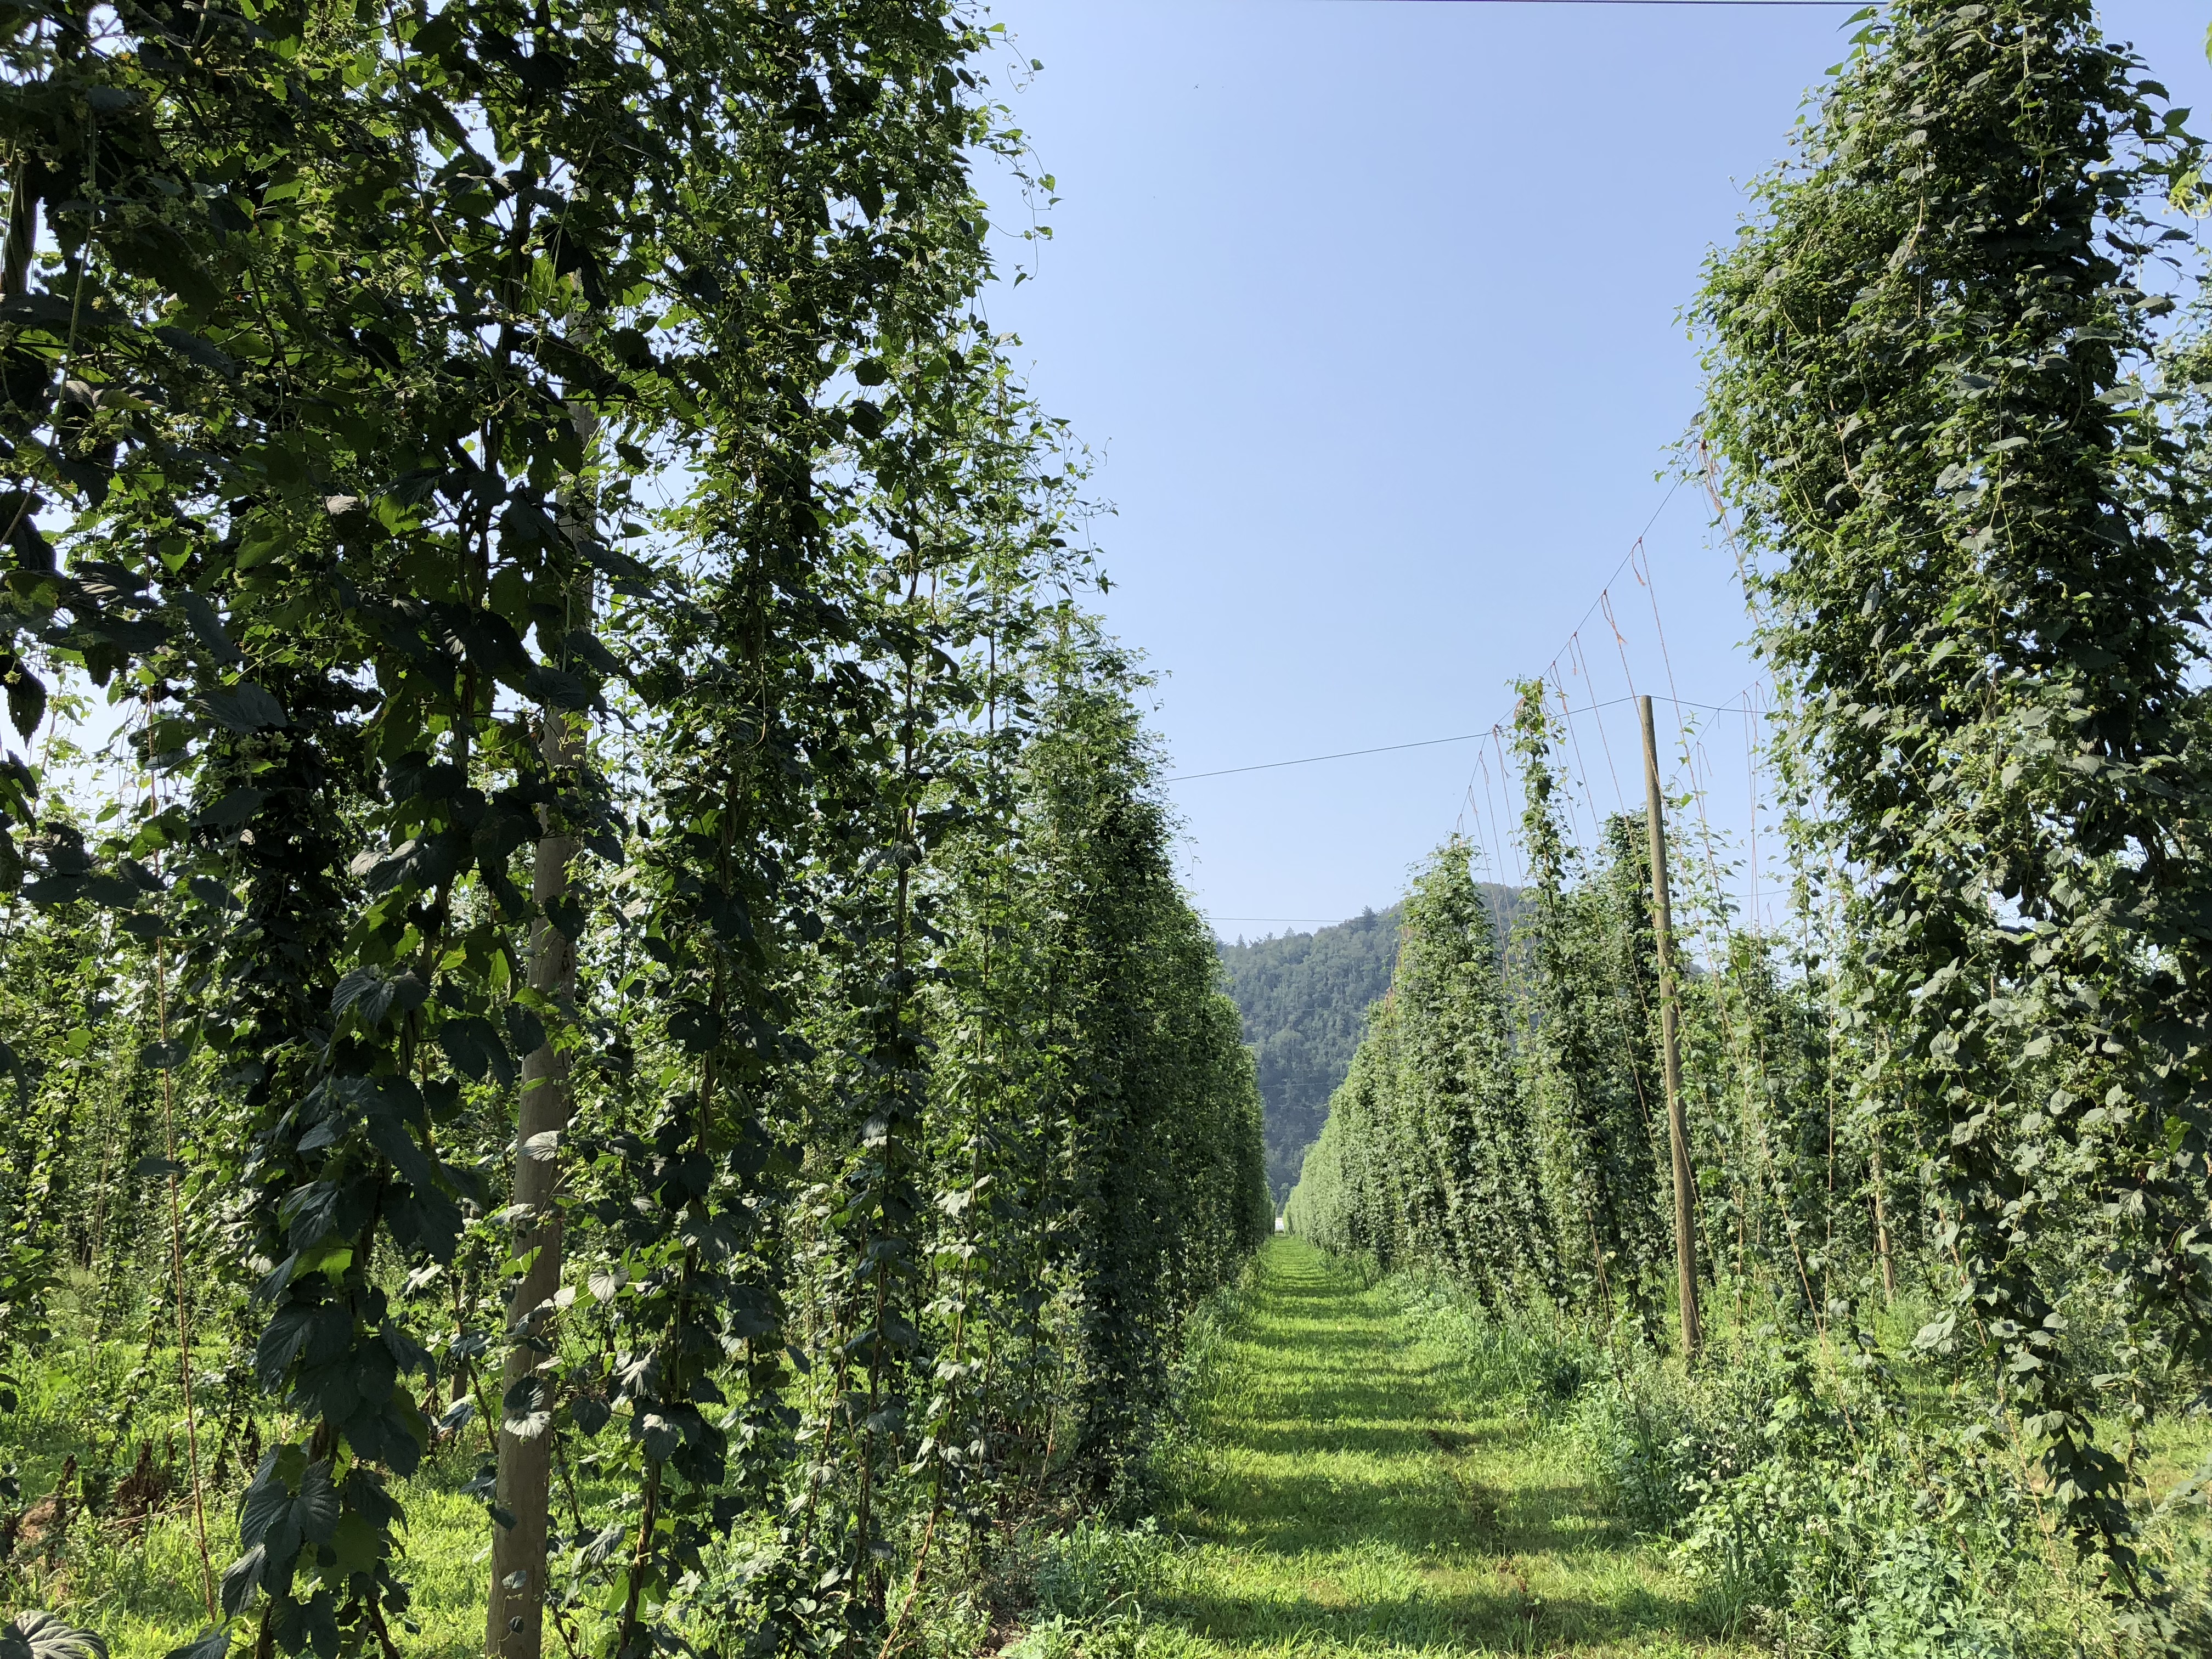 Colour photograph of a hop field. The hops grow vertically up a string tied to a wire.